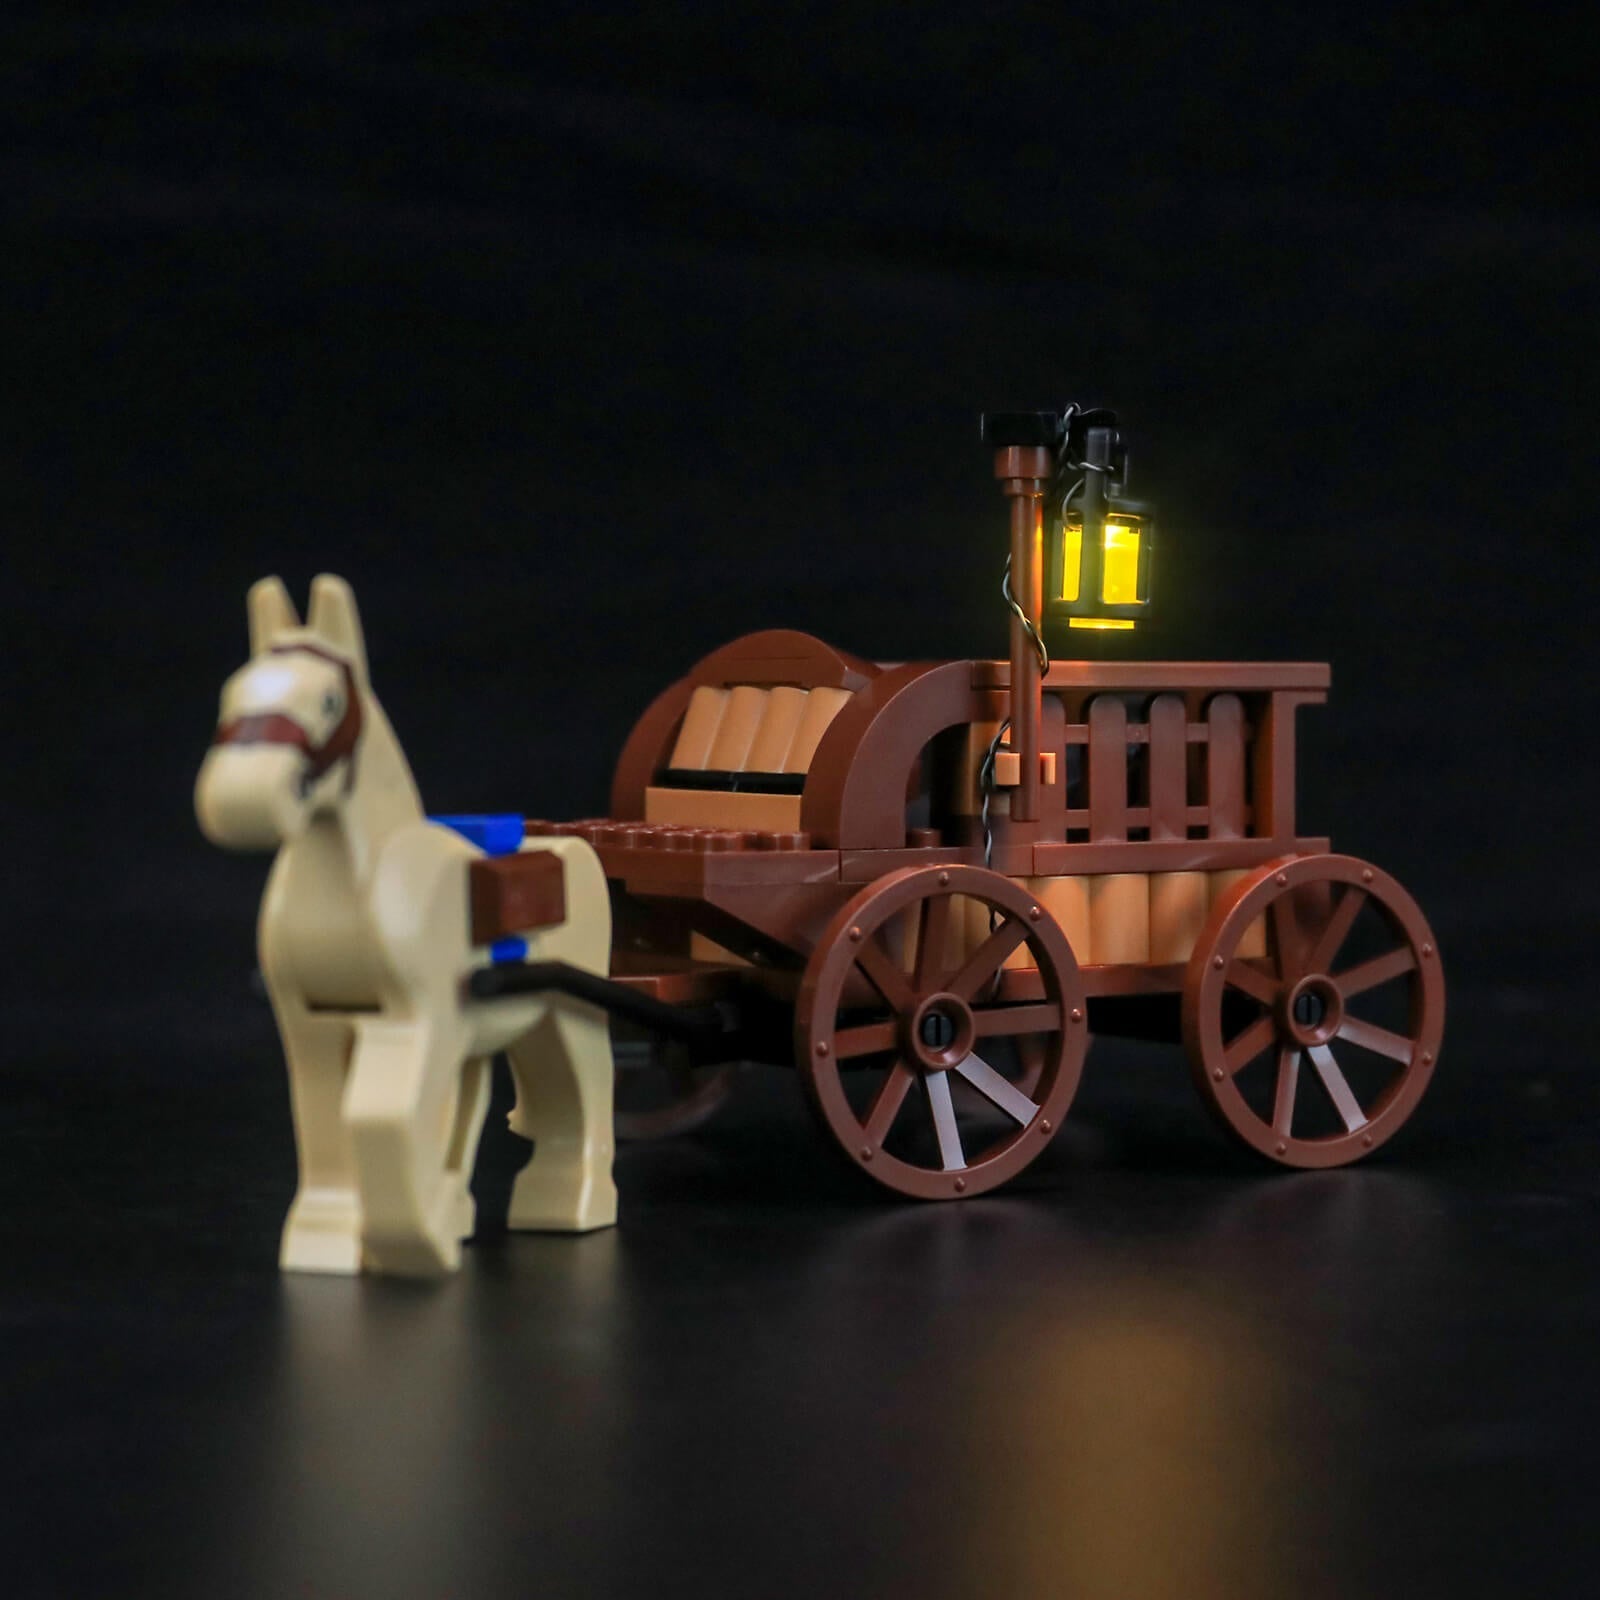 lego medieval blacksmith horse and cart with lighting lamp